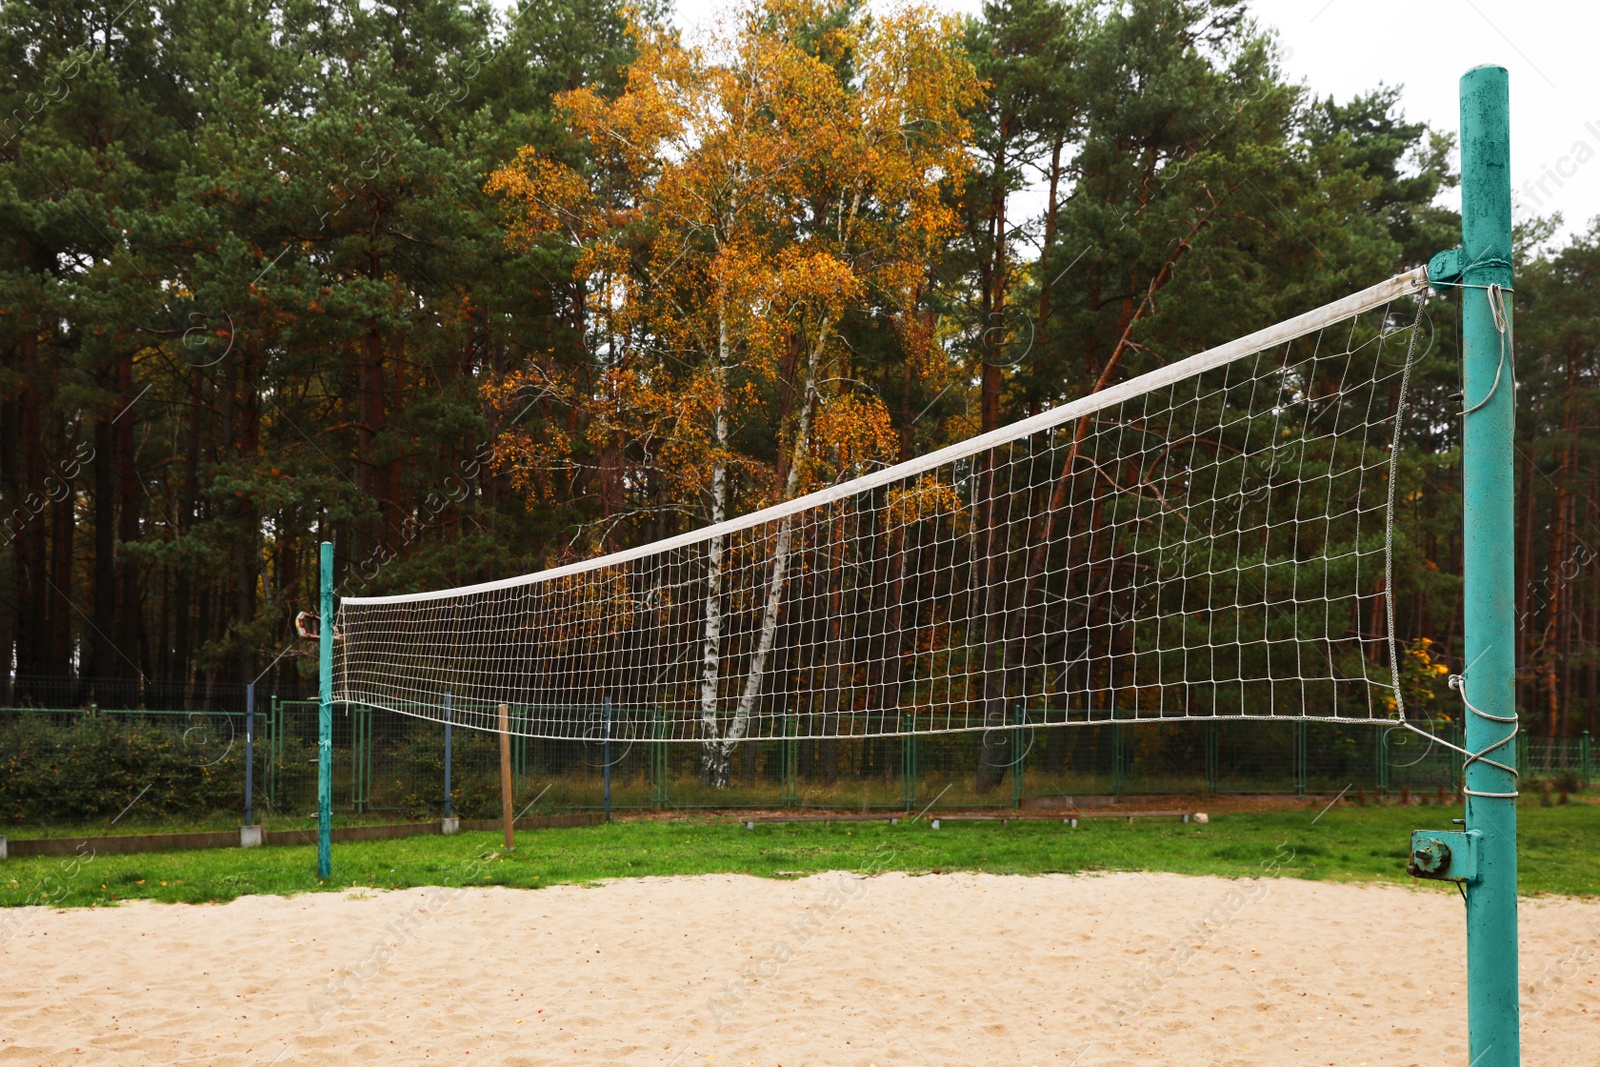 Photo of Sand volleyball court with net near trees